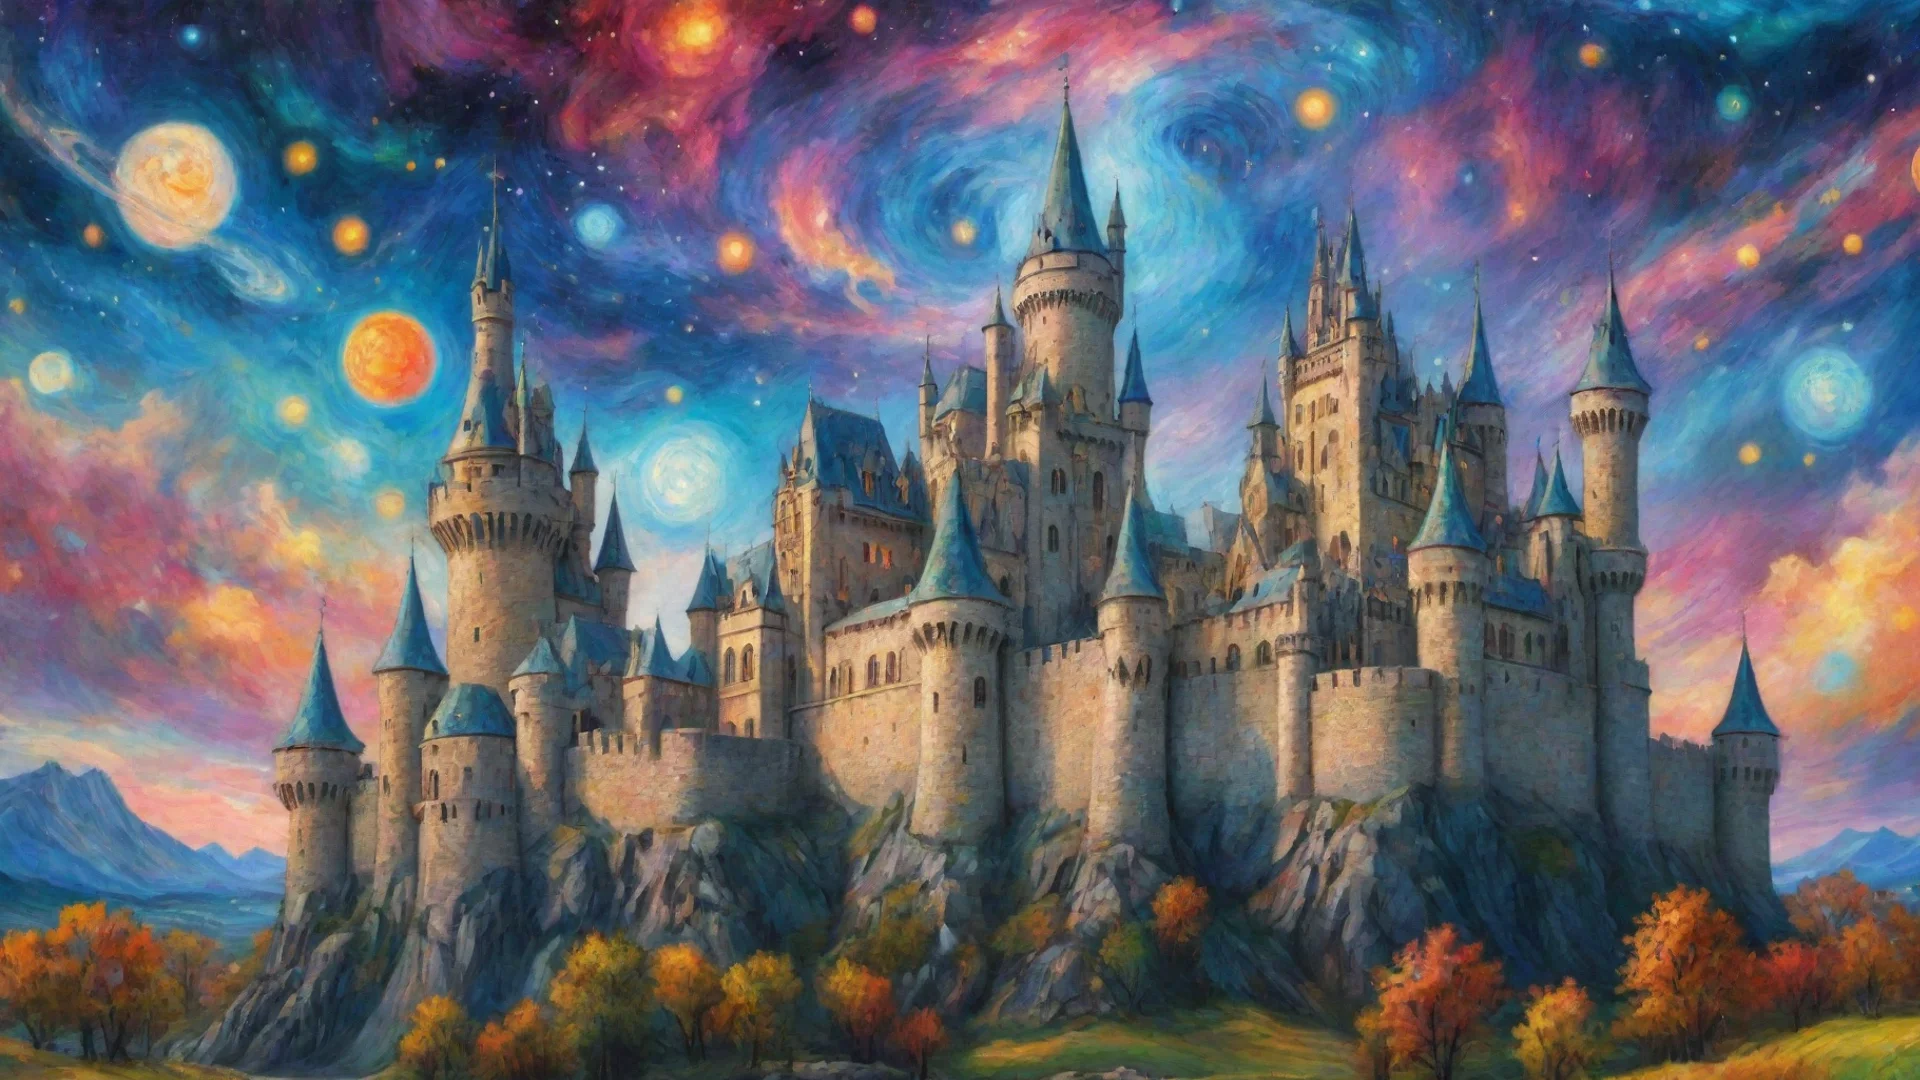 trending epic castle with colorful artistic sky planets van gogh style detailed hd asthetic castle good looking fantastic 1 wide